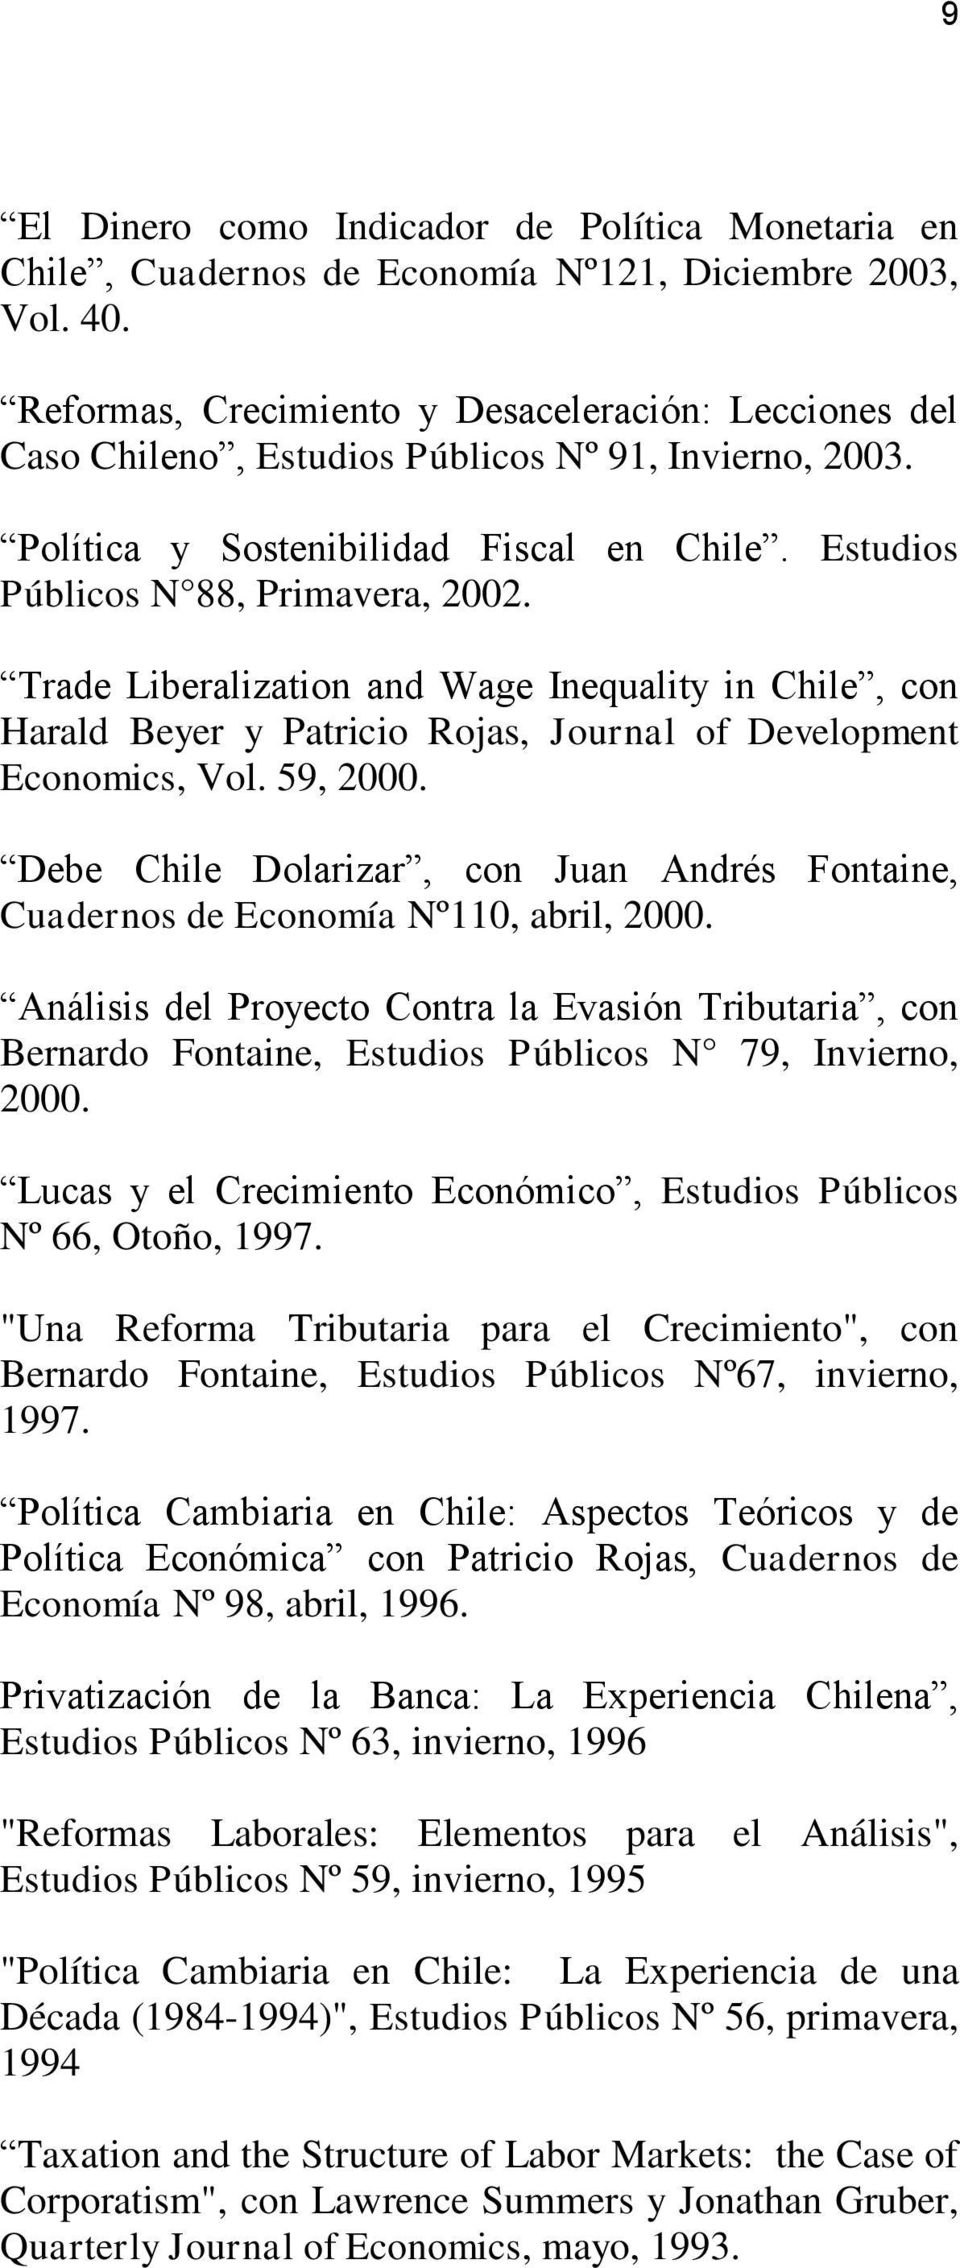 Trade Liberalization and Wage Inequality in Chile, con Harald Beyer y Patricio Rojas, Journal of Development Economics, Vol. 59, 2000.